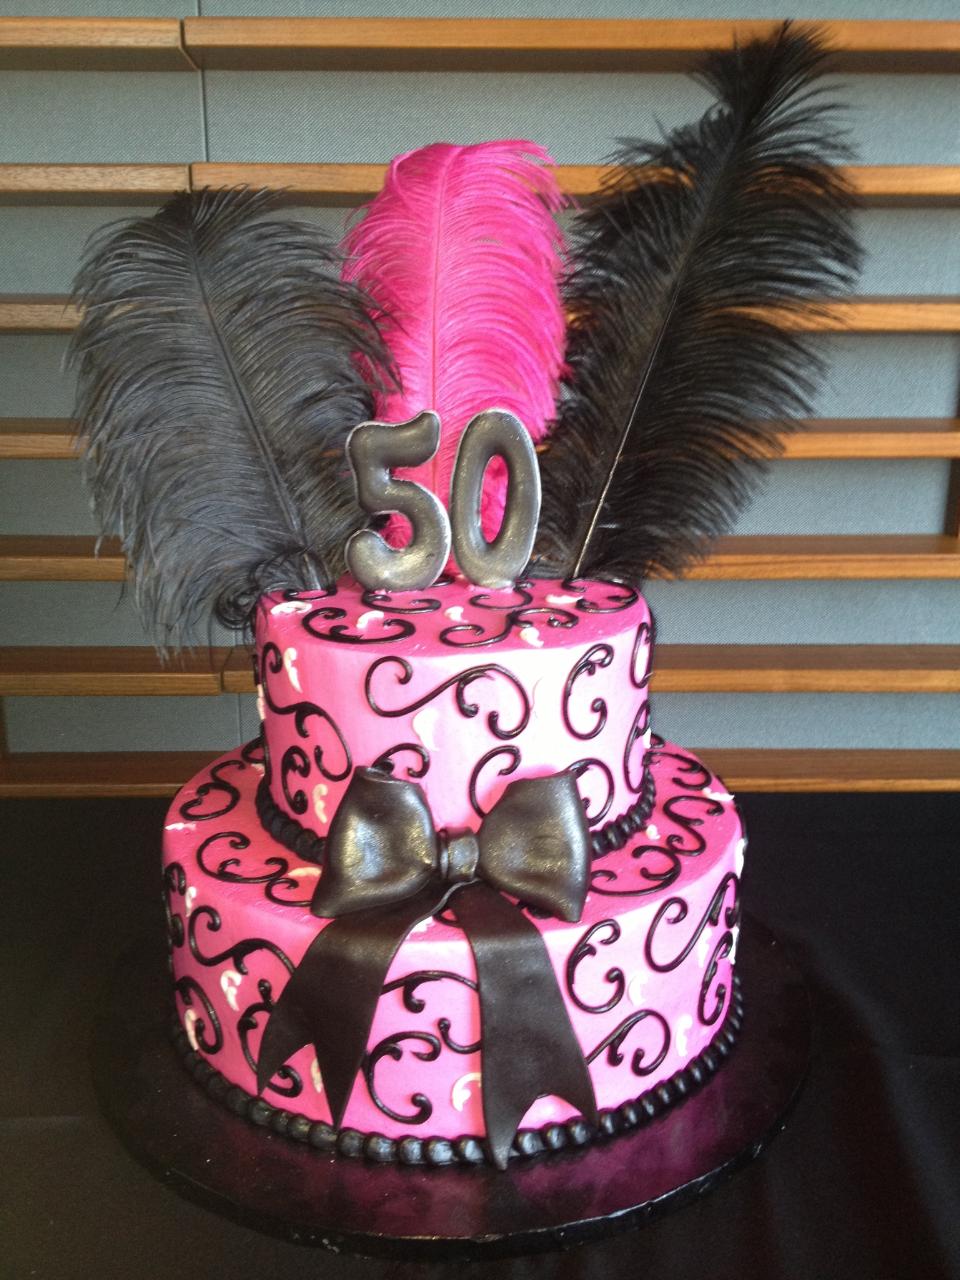 Hot Pink and Black 50th Birthday Cake